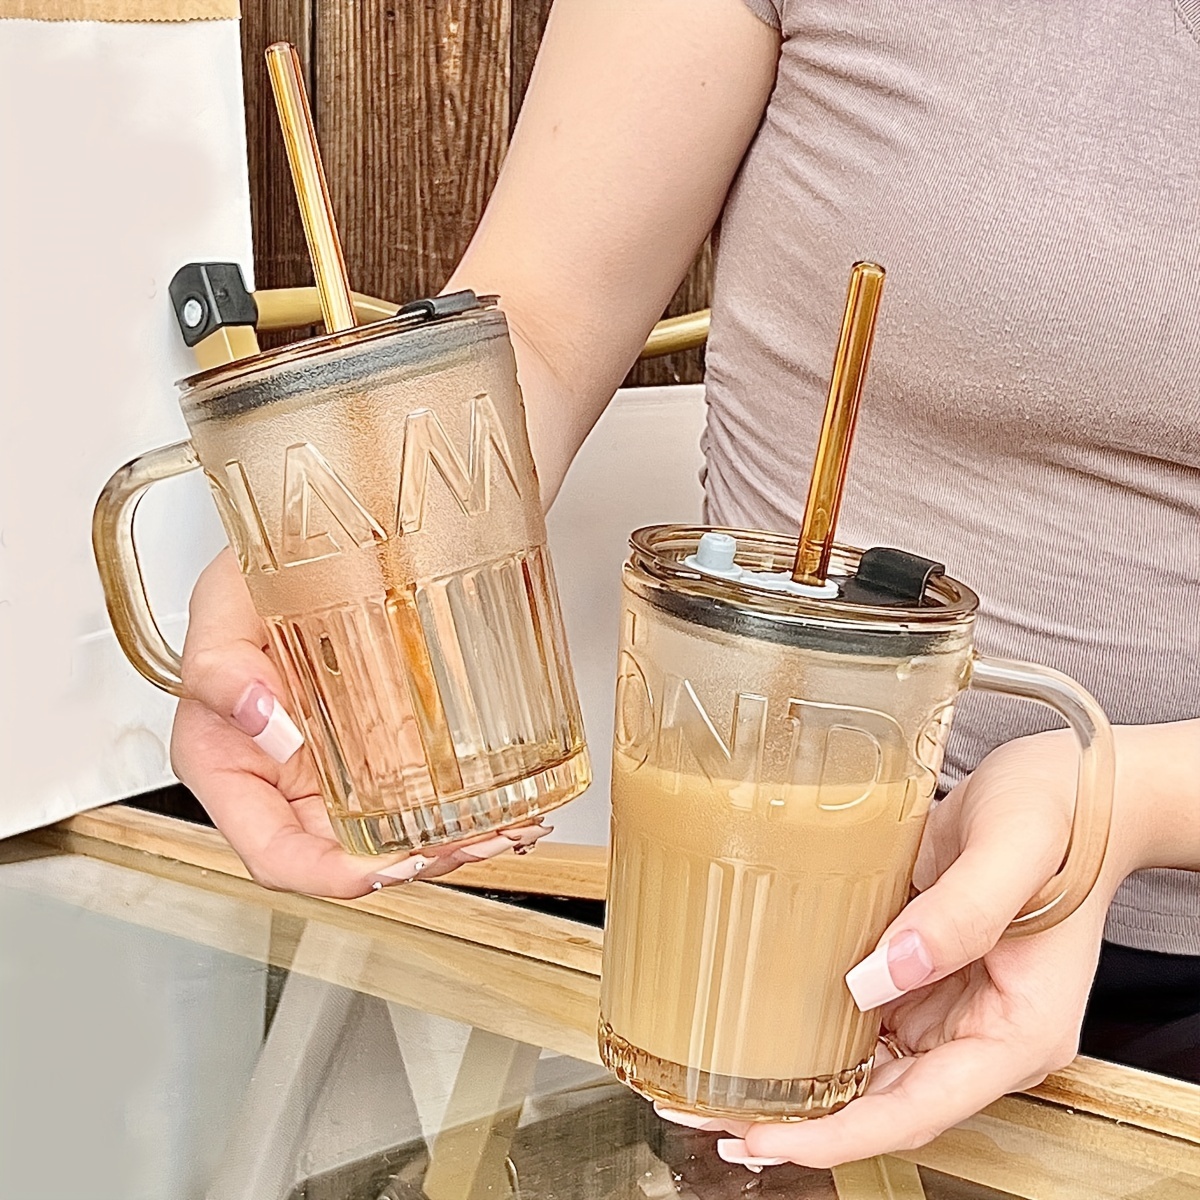 Glass Cup With Straw And Lid, 15.4oz (about 450g) Iced Coffee Cup